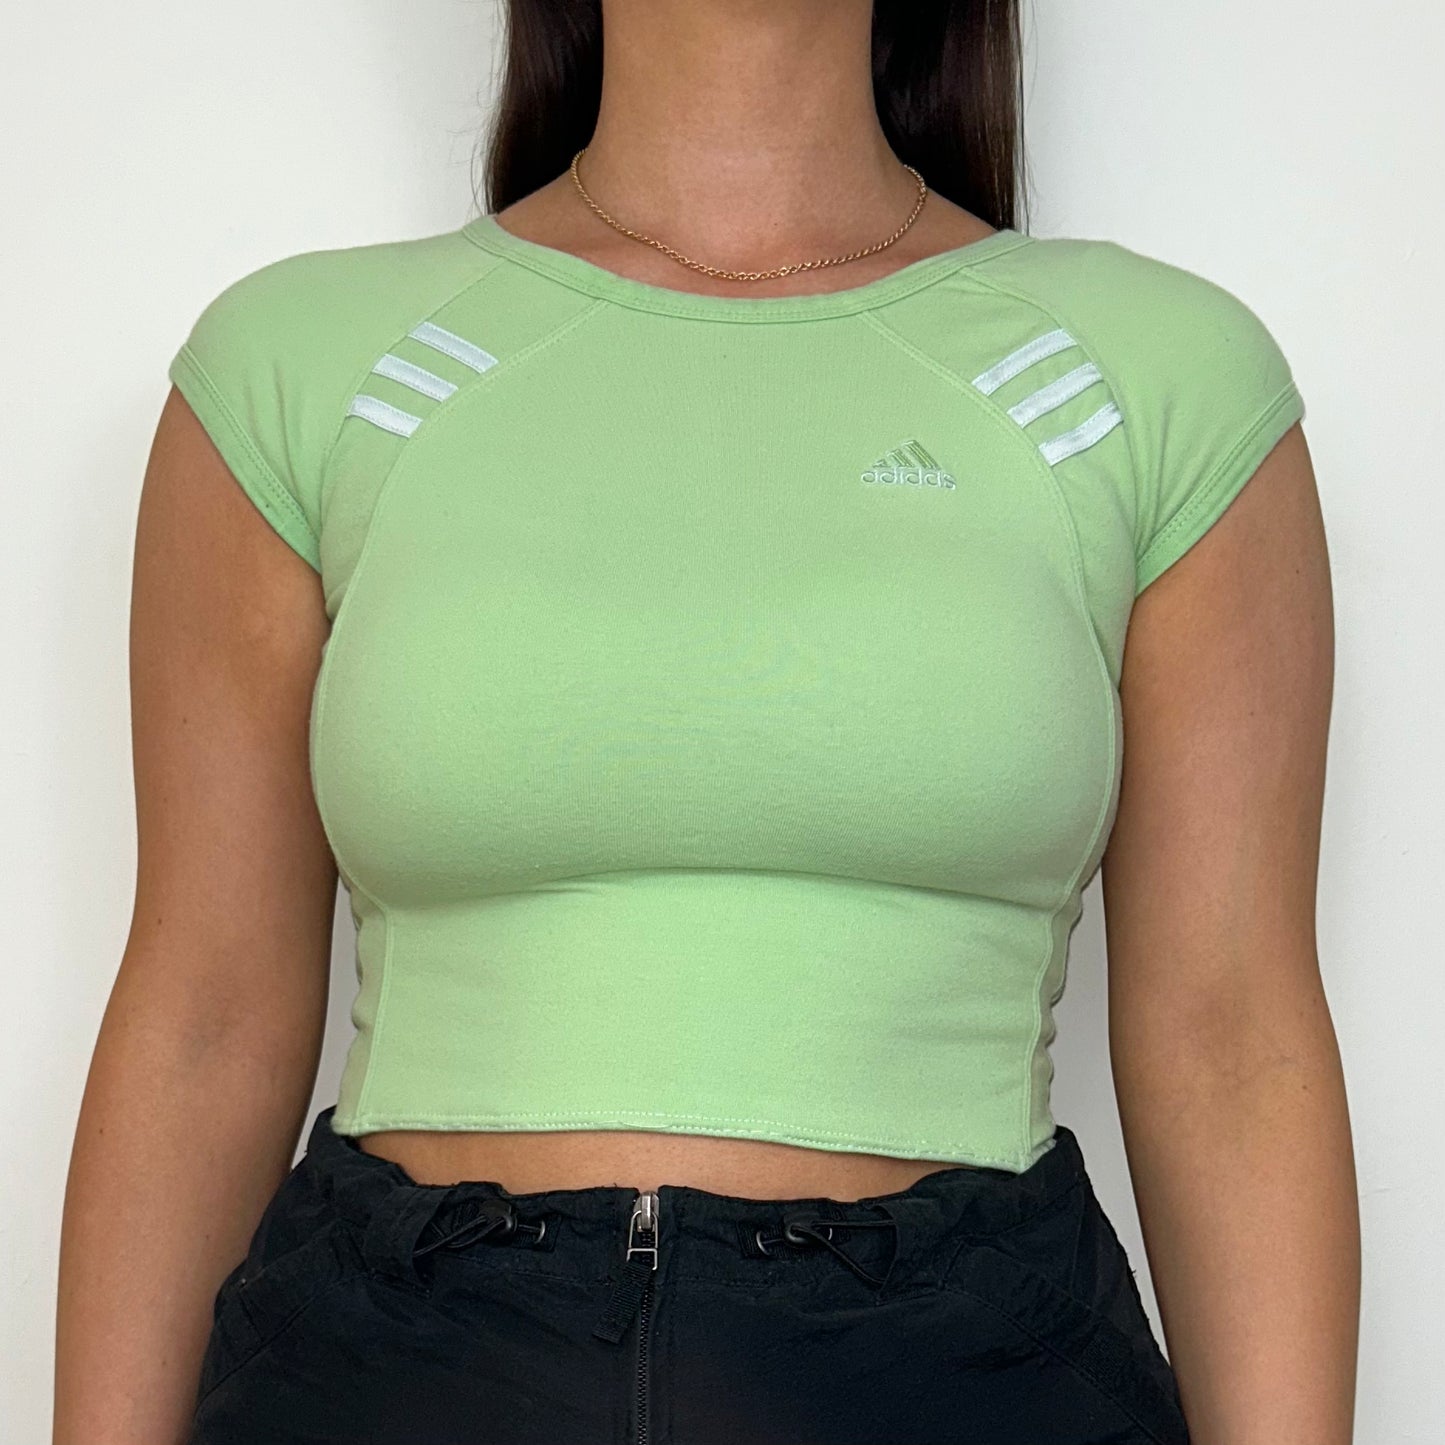 close up of light green short sleeve crop top with white adidas logo shown on a model wearing a black mini skirt